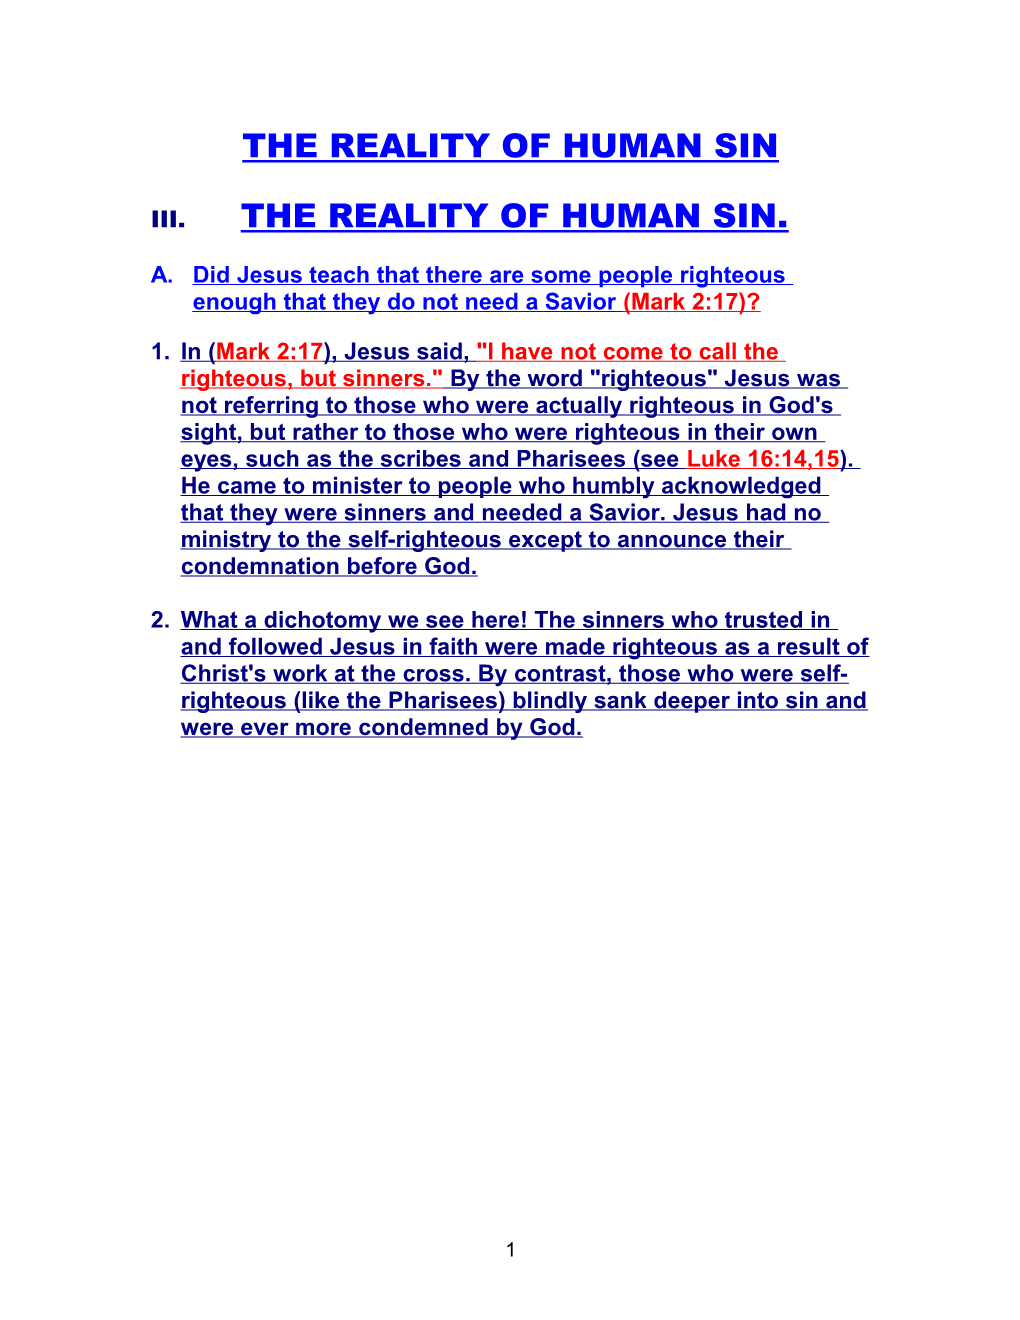 The Reality of Human Sin